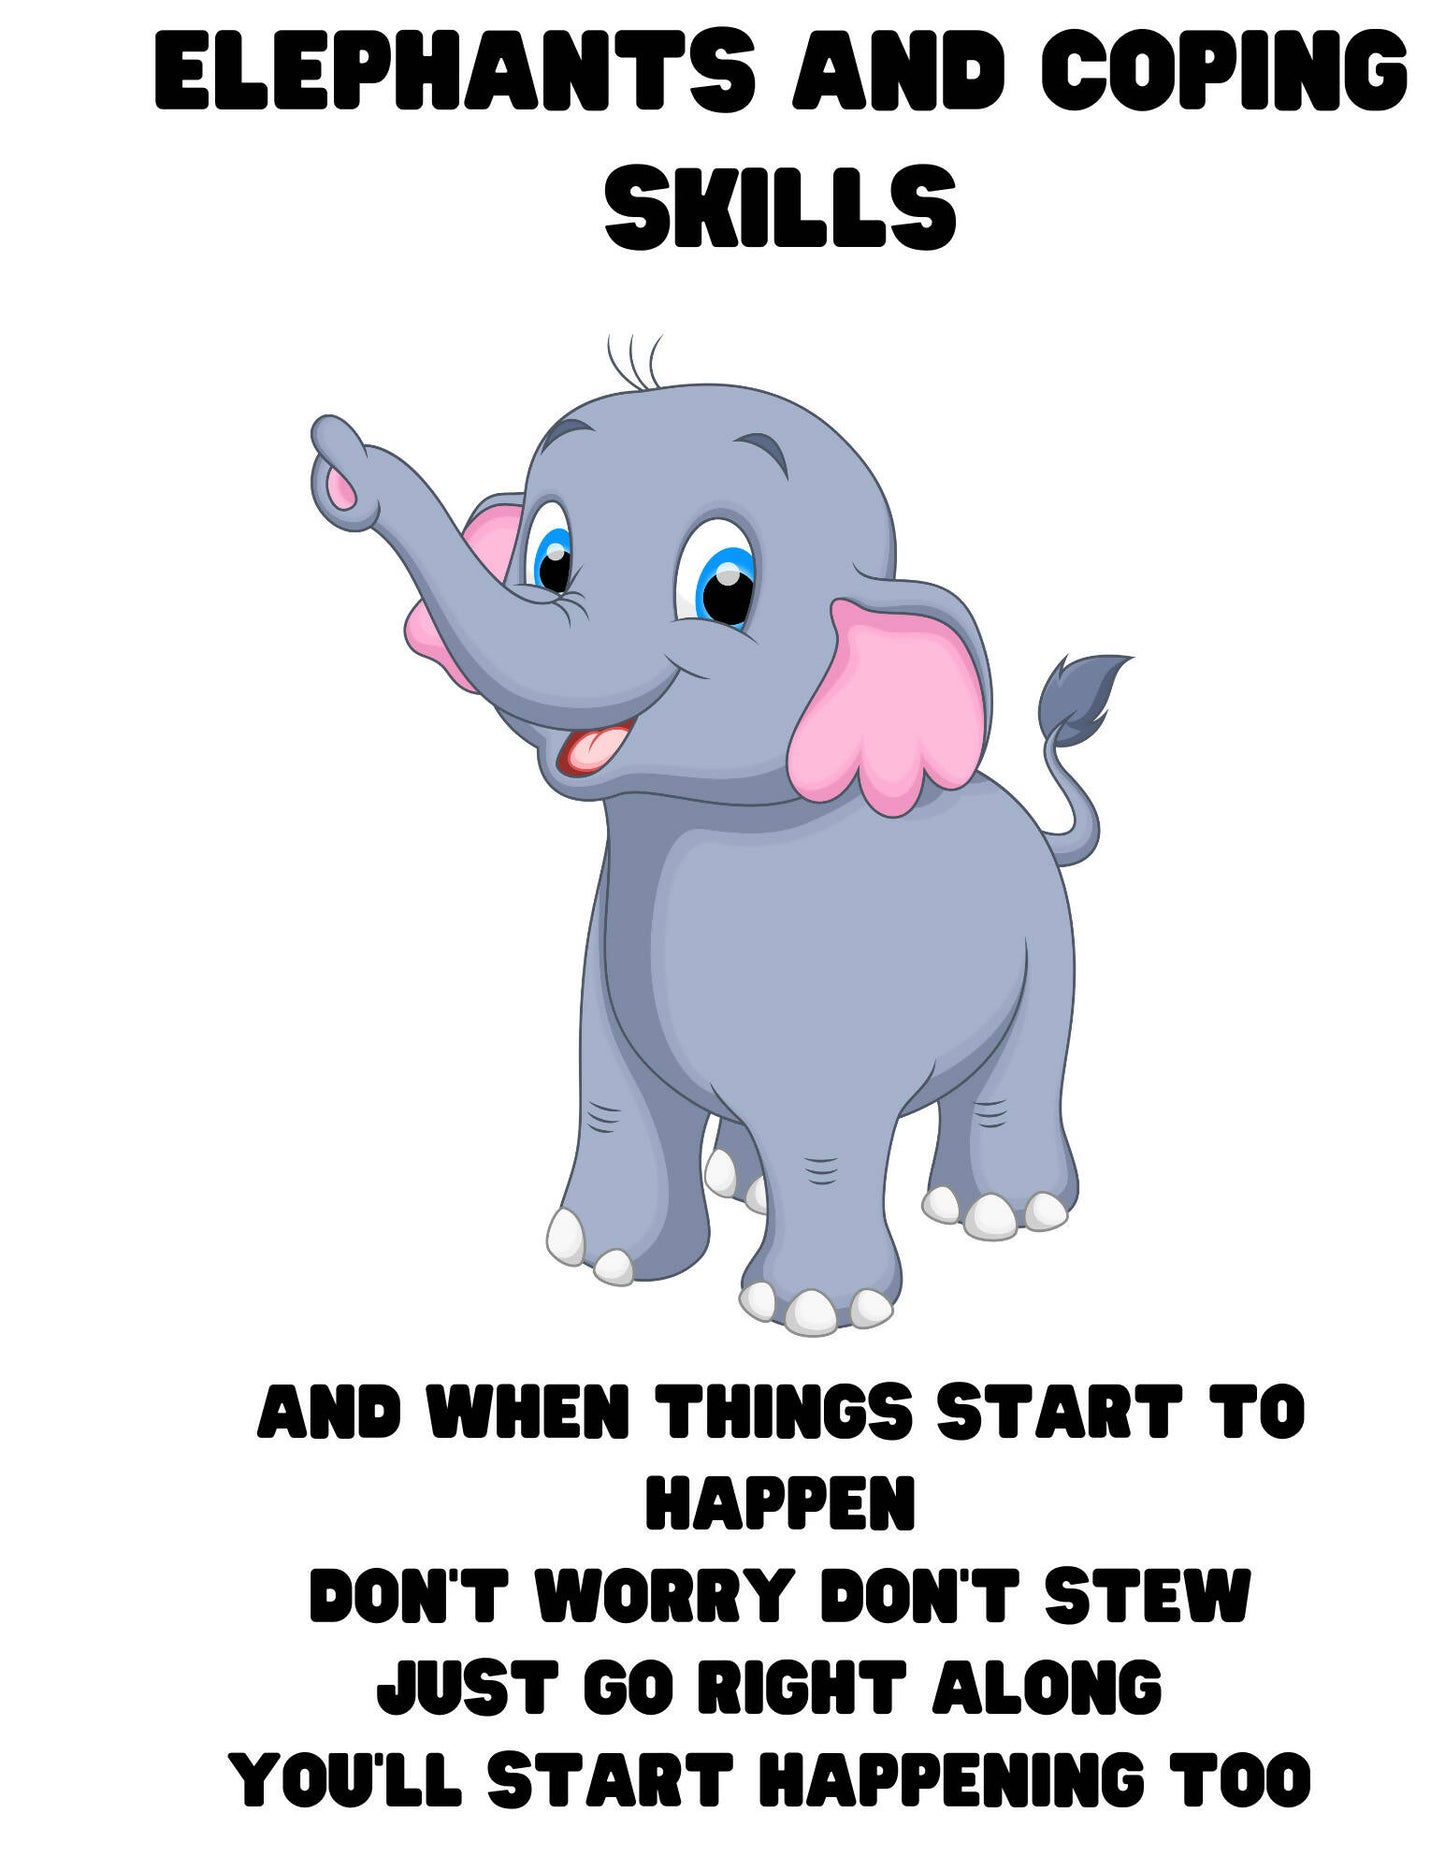 Elephant coping skills coloring book